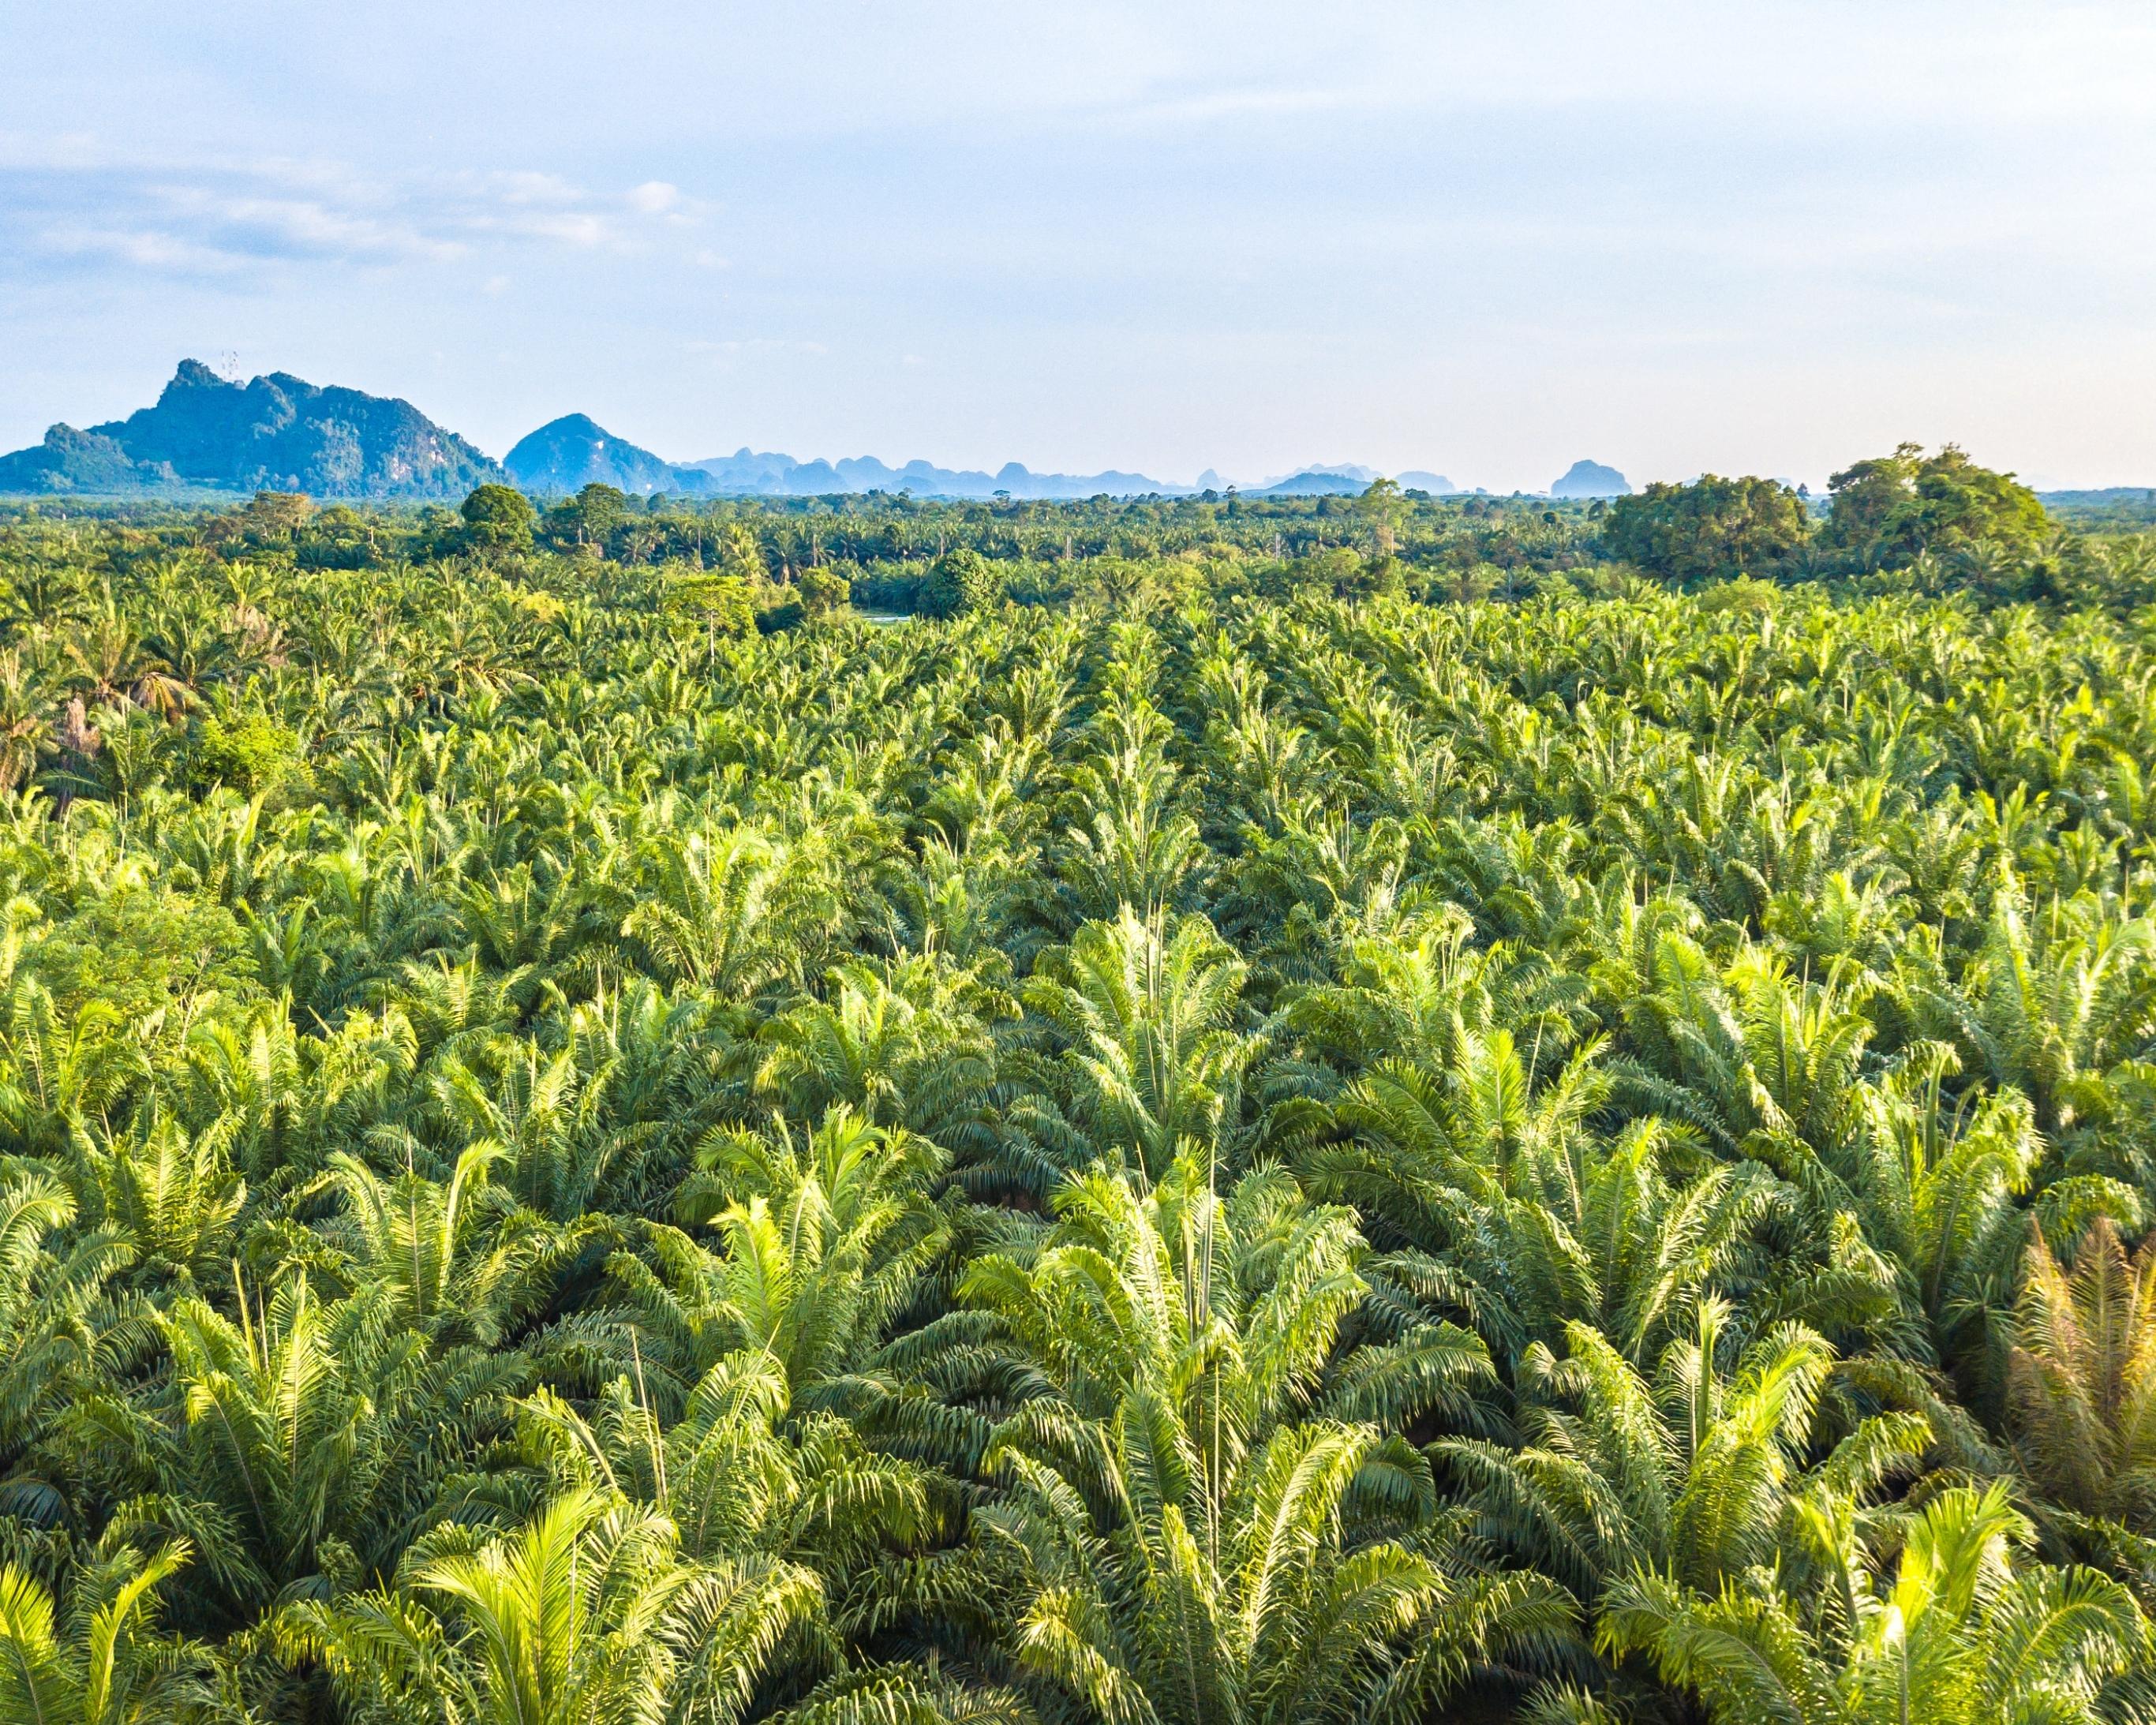 Why We Do Without Palm Oil: For the Environment